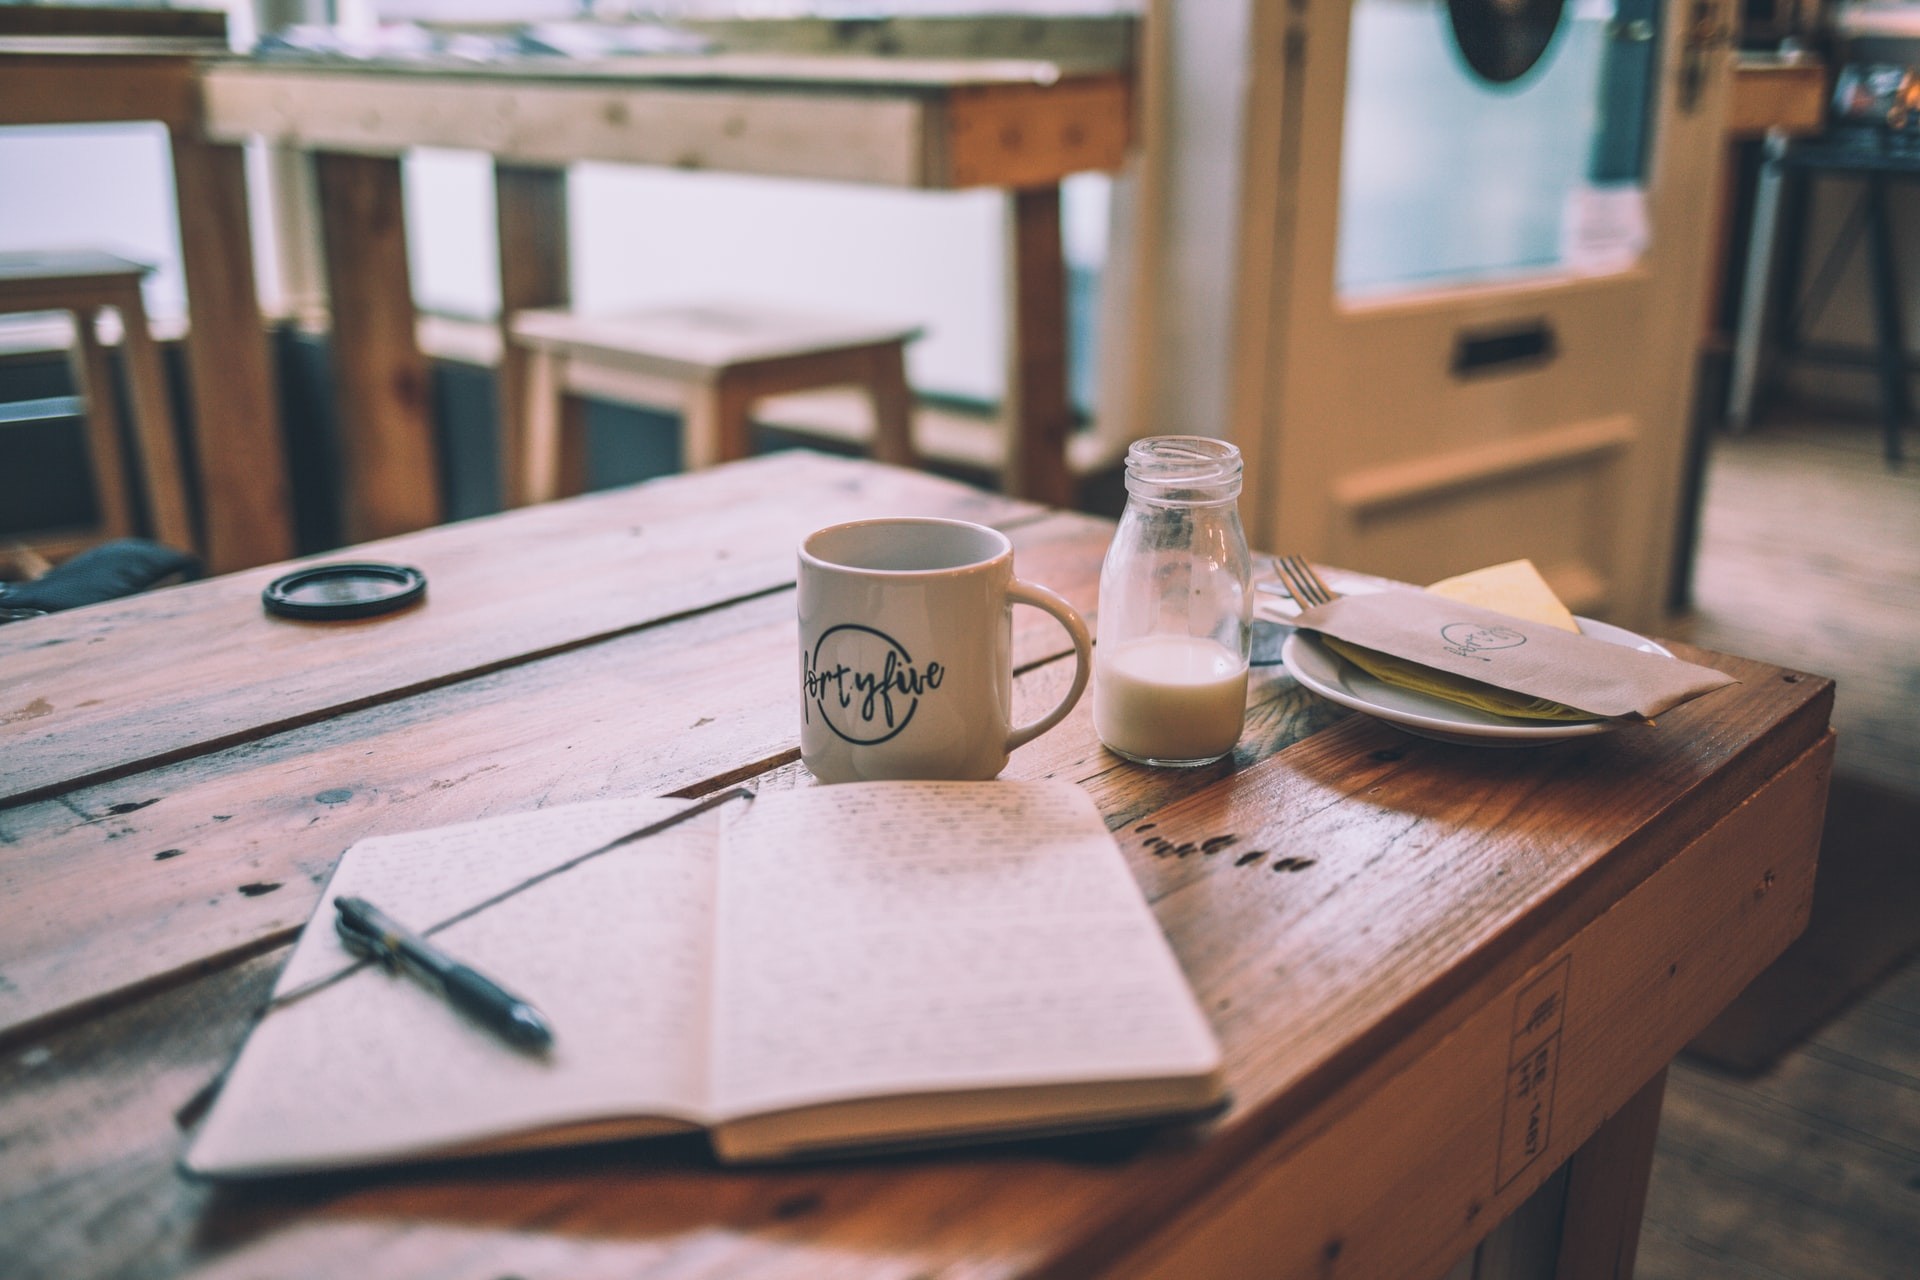 Journal, coffee mug and plate on a cafe table as part of a teacher self-care routine.